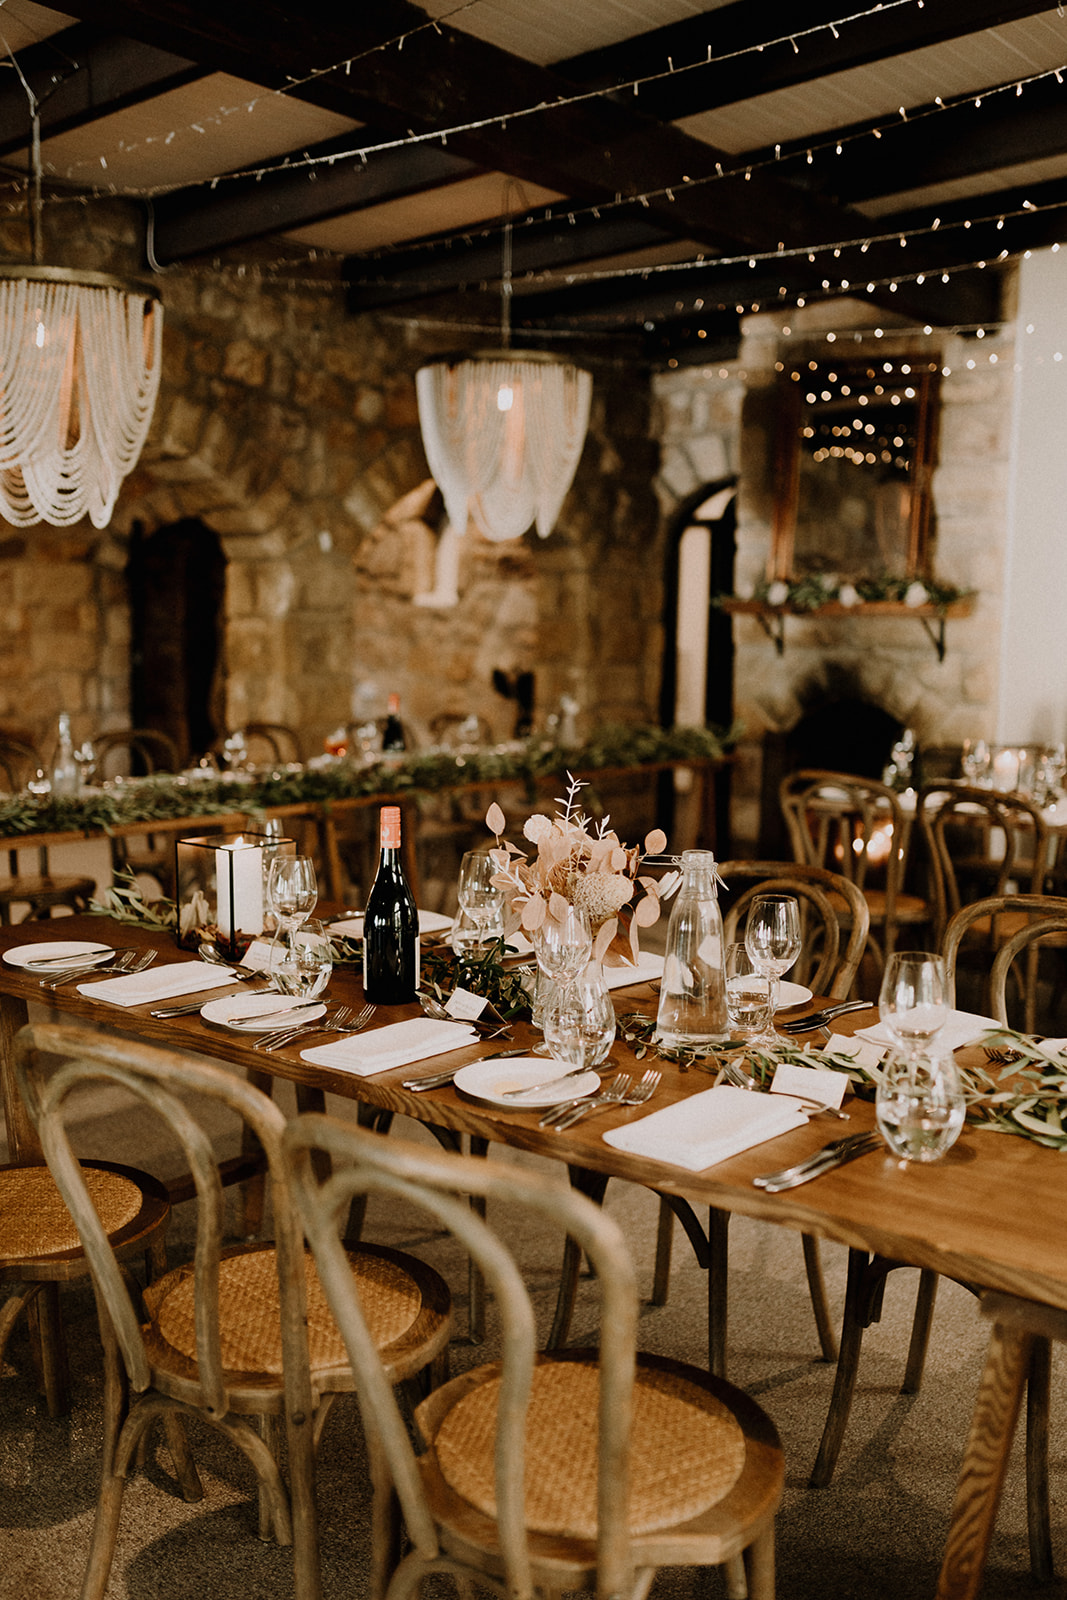 The Manor Basket Range, Adelaide Hills Wedding Venue, Castle suitable for wedding ceremonies and receptions, a beautiful venue only minutes from the Adelaide CBD.